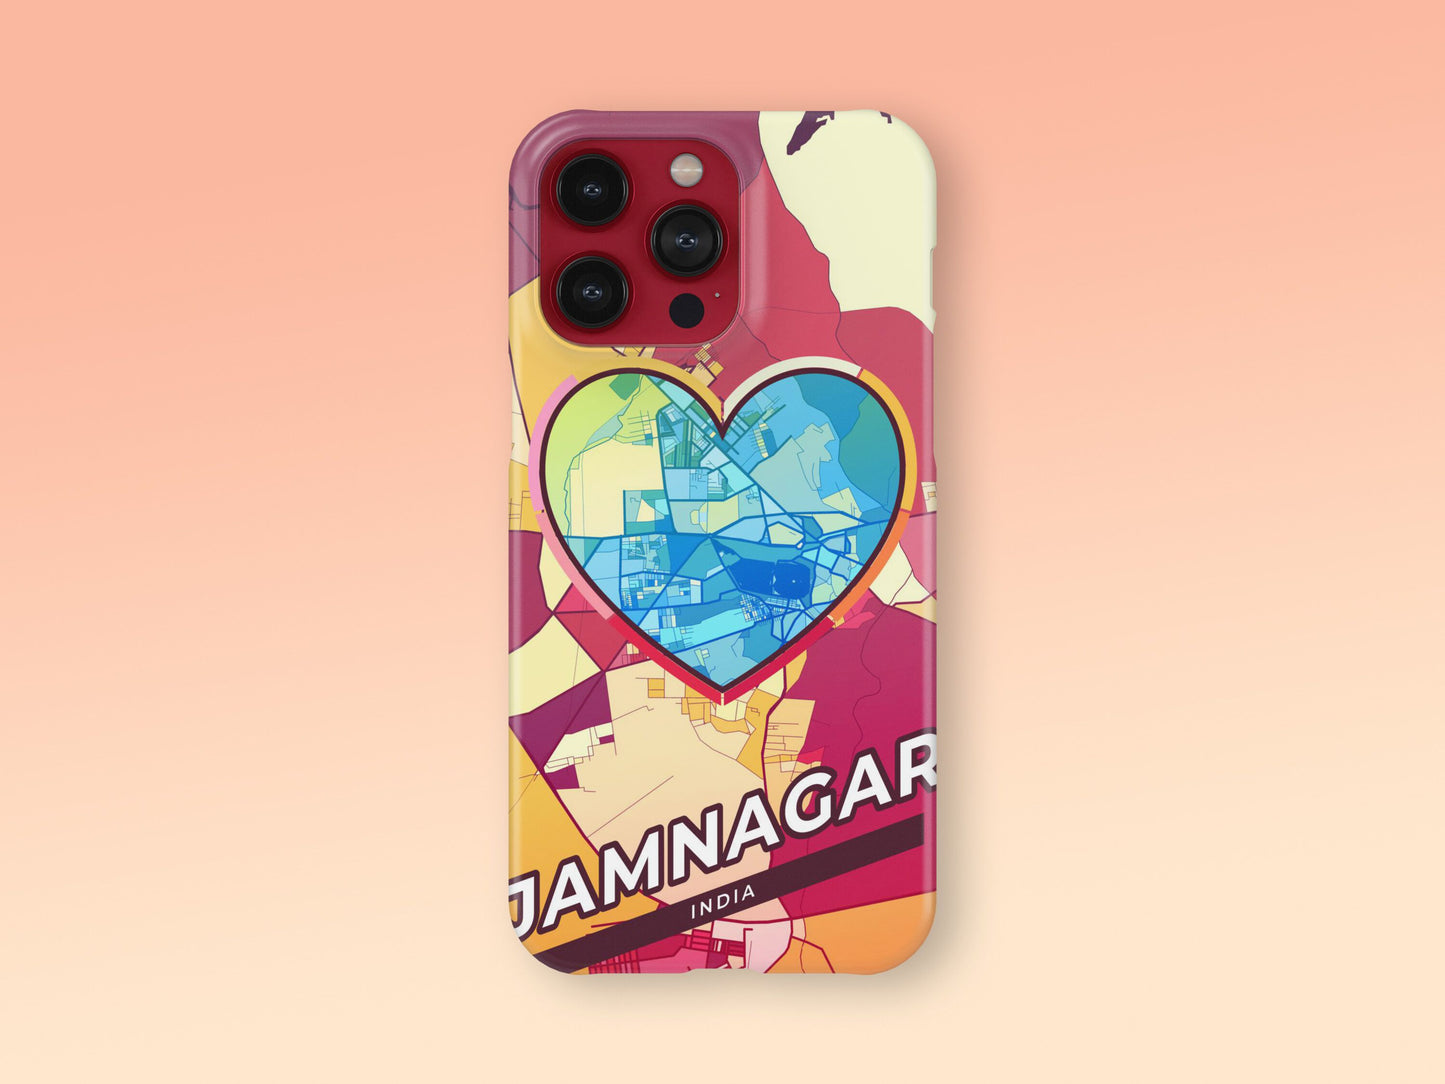 Jamnagar India slim phone case with colorful icon. Birthday, wedding or housewarming gift. Couple match cases. 2